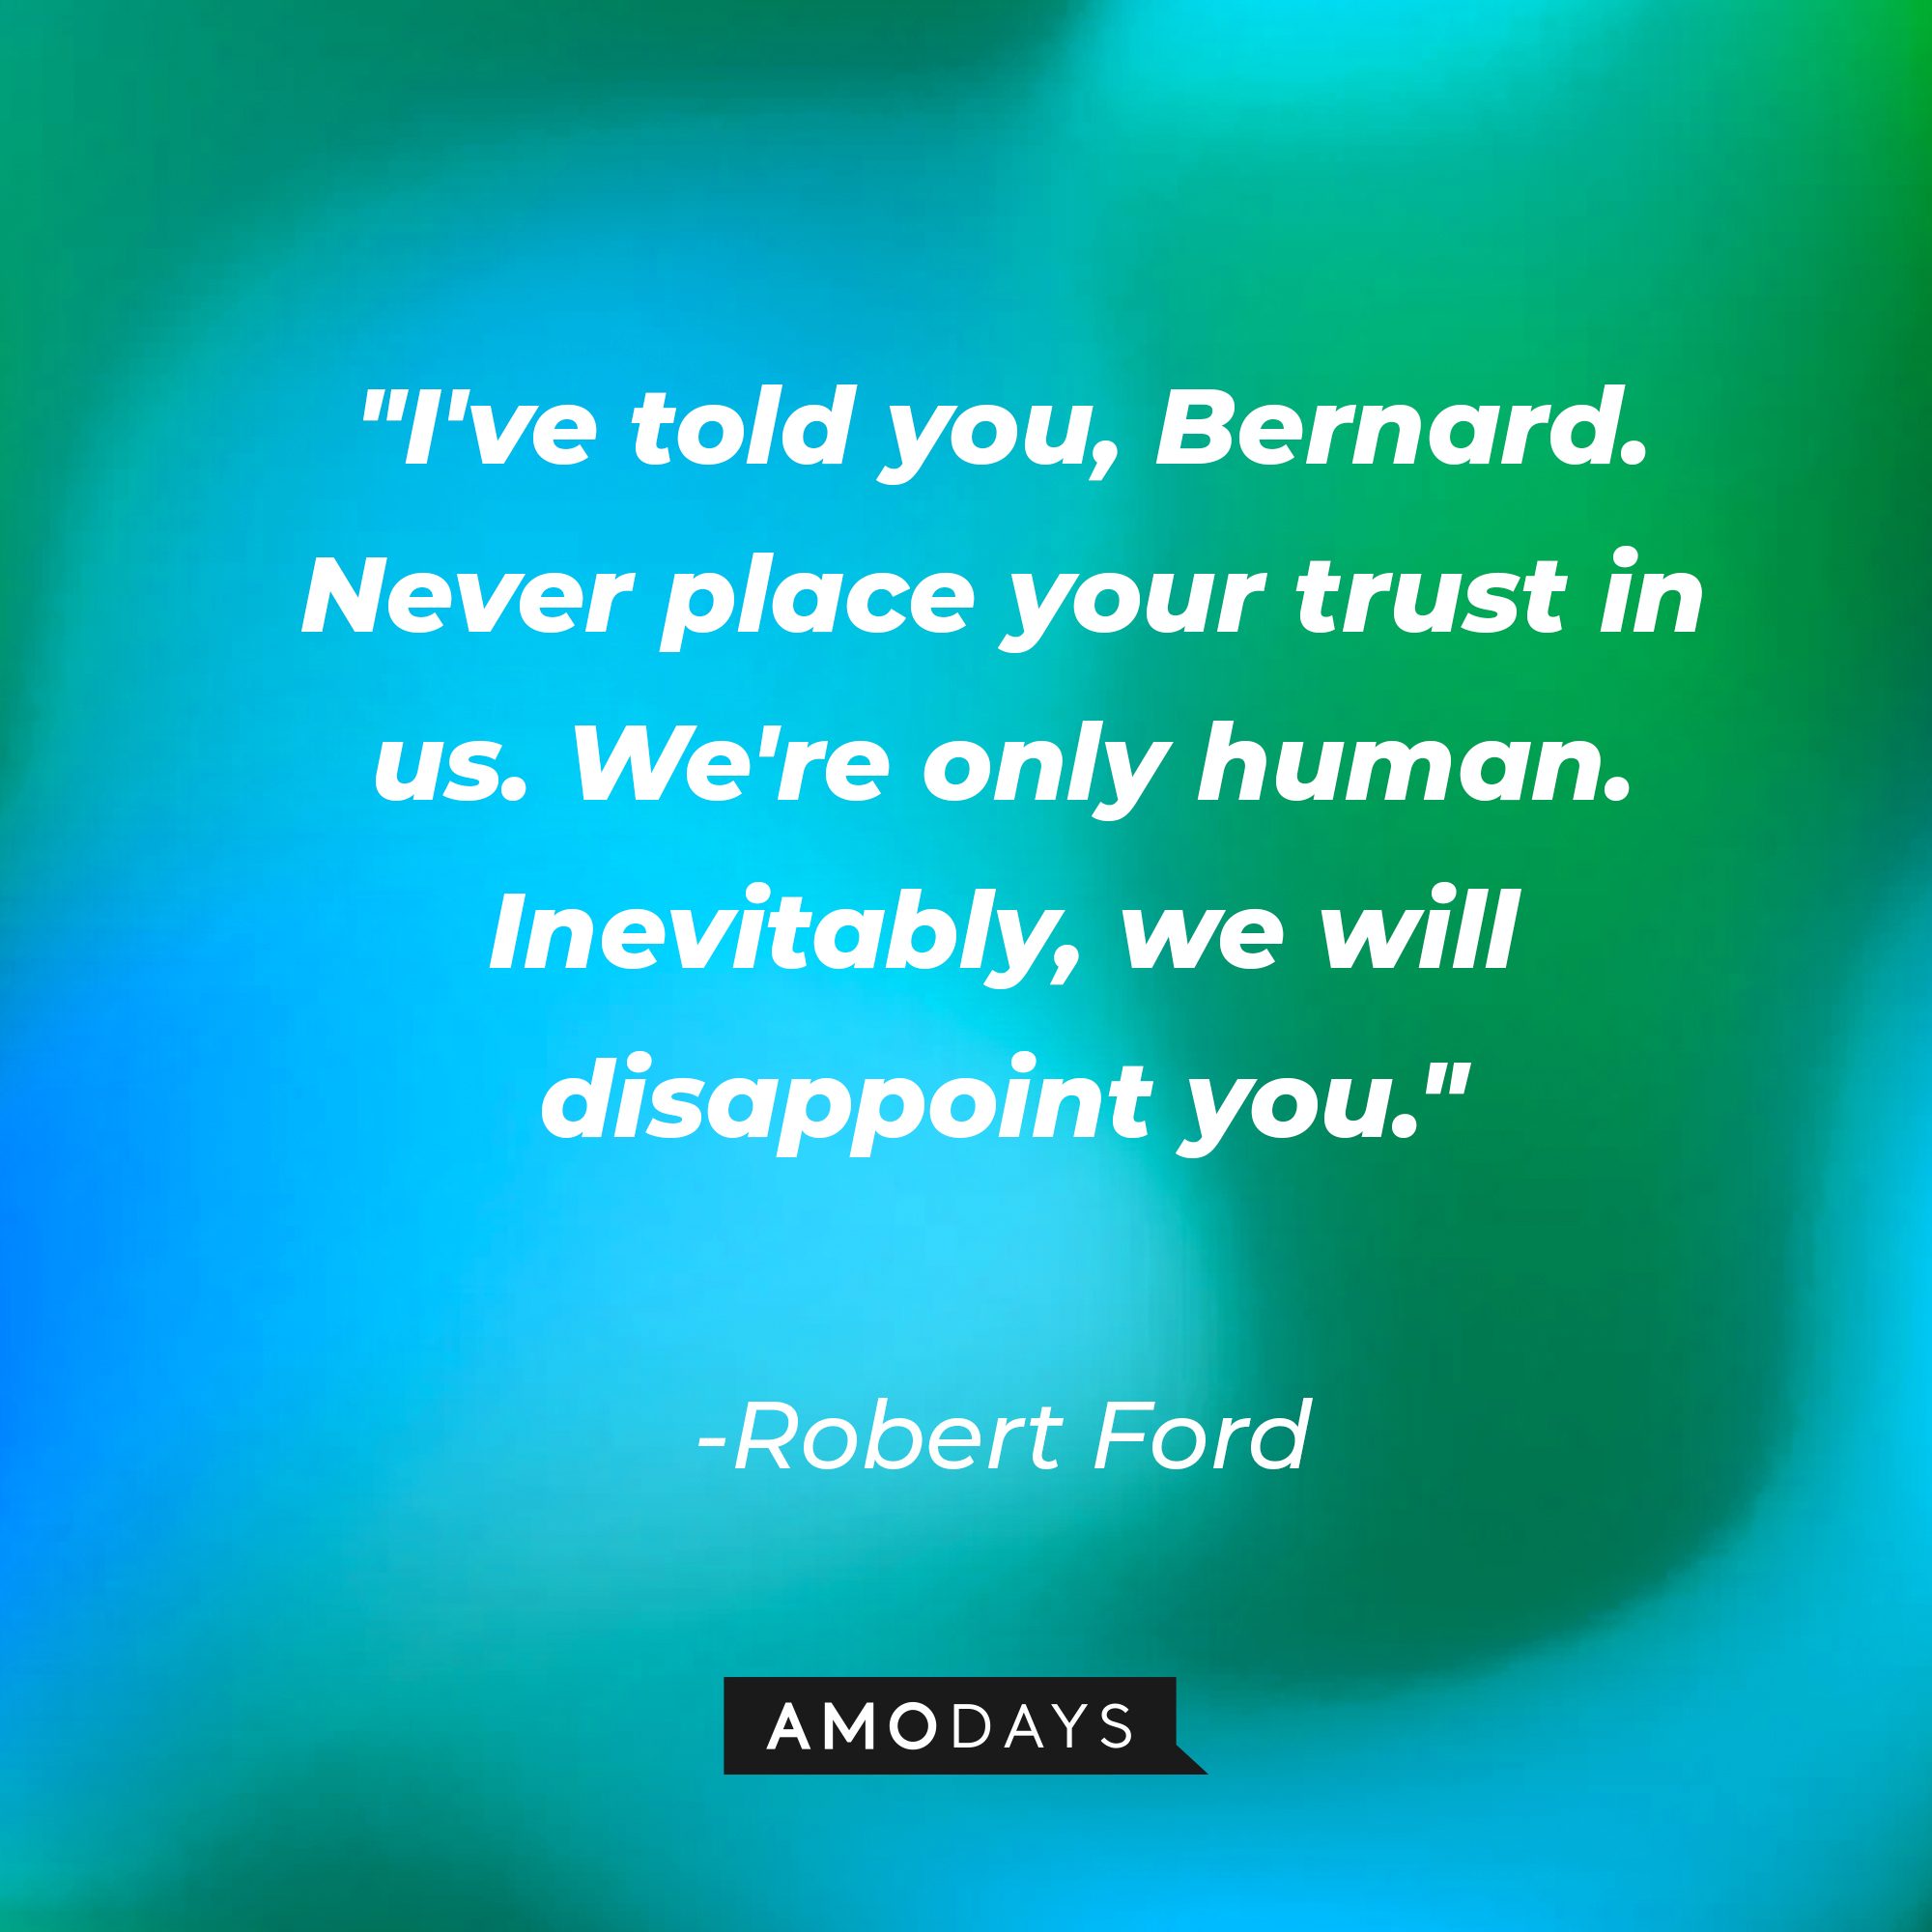 Robert Ford's quote: "I've told you, Bernard. Never place your trust in us. We're only human. Inevitably, we will disappoint you." | Source: AmoDays